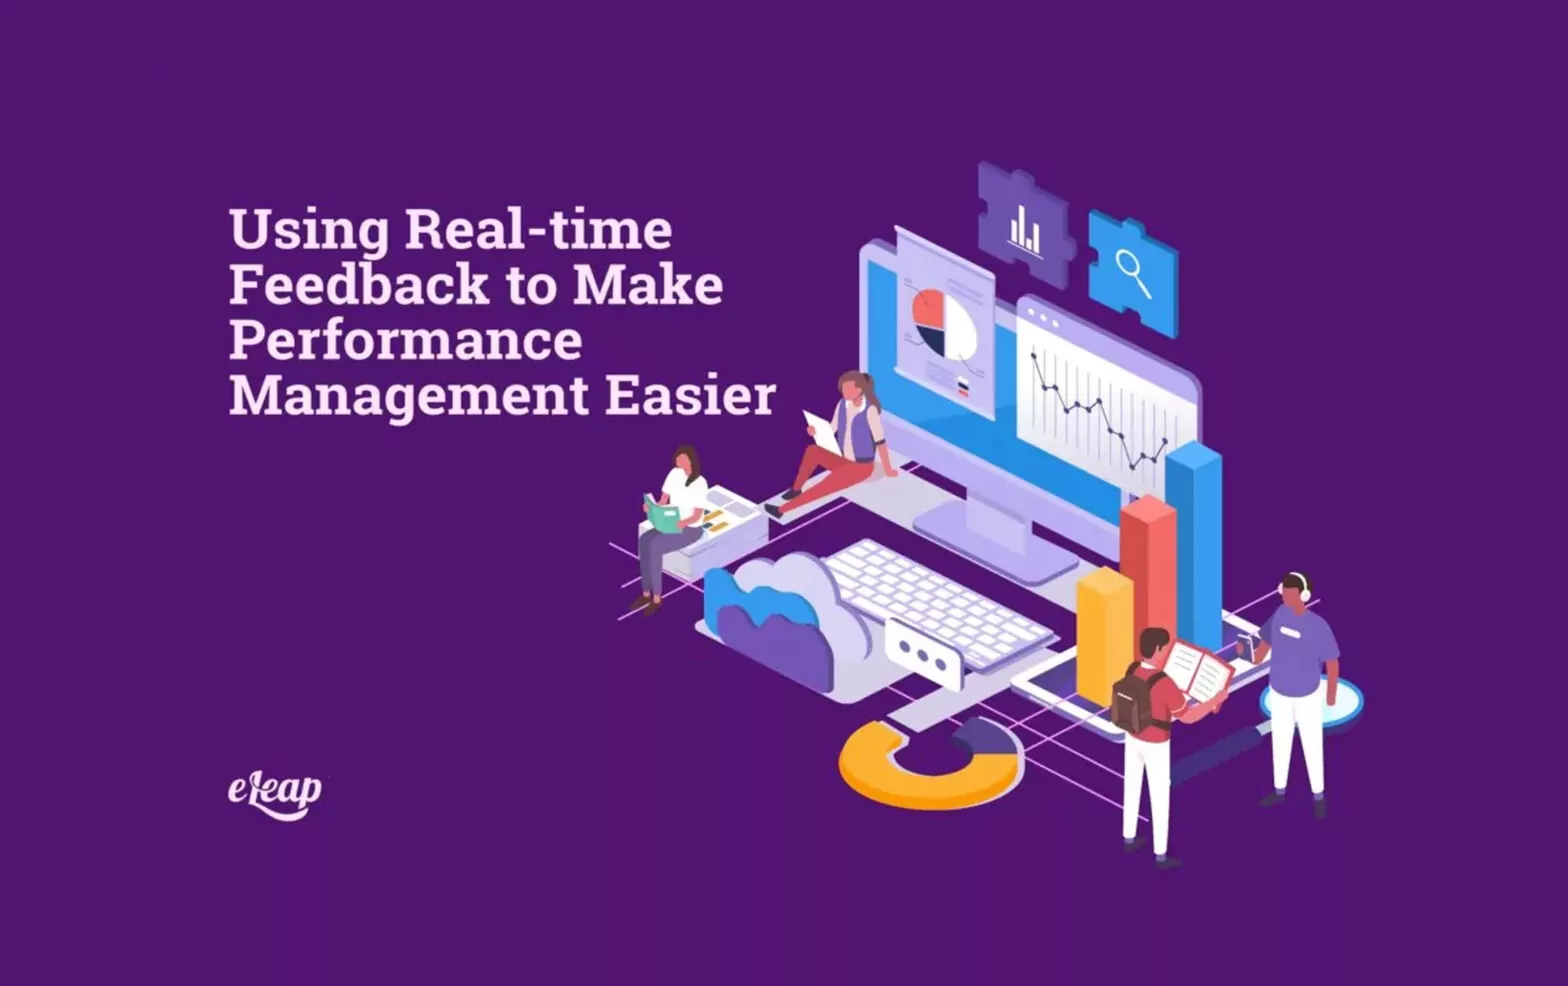 Using Real-time Feedback to Make Performance Management Easier